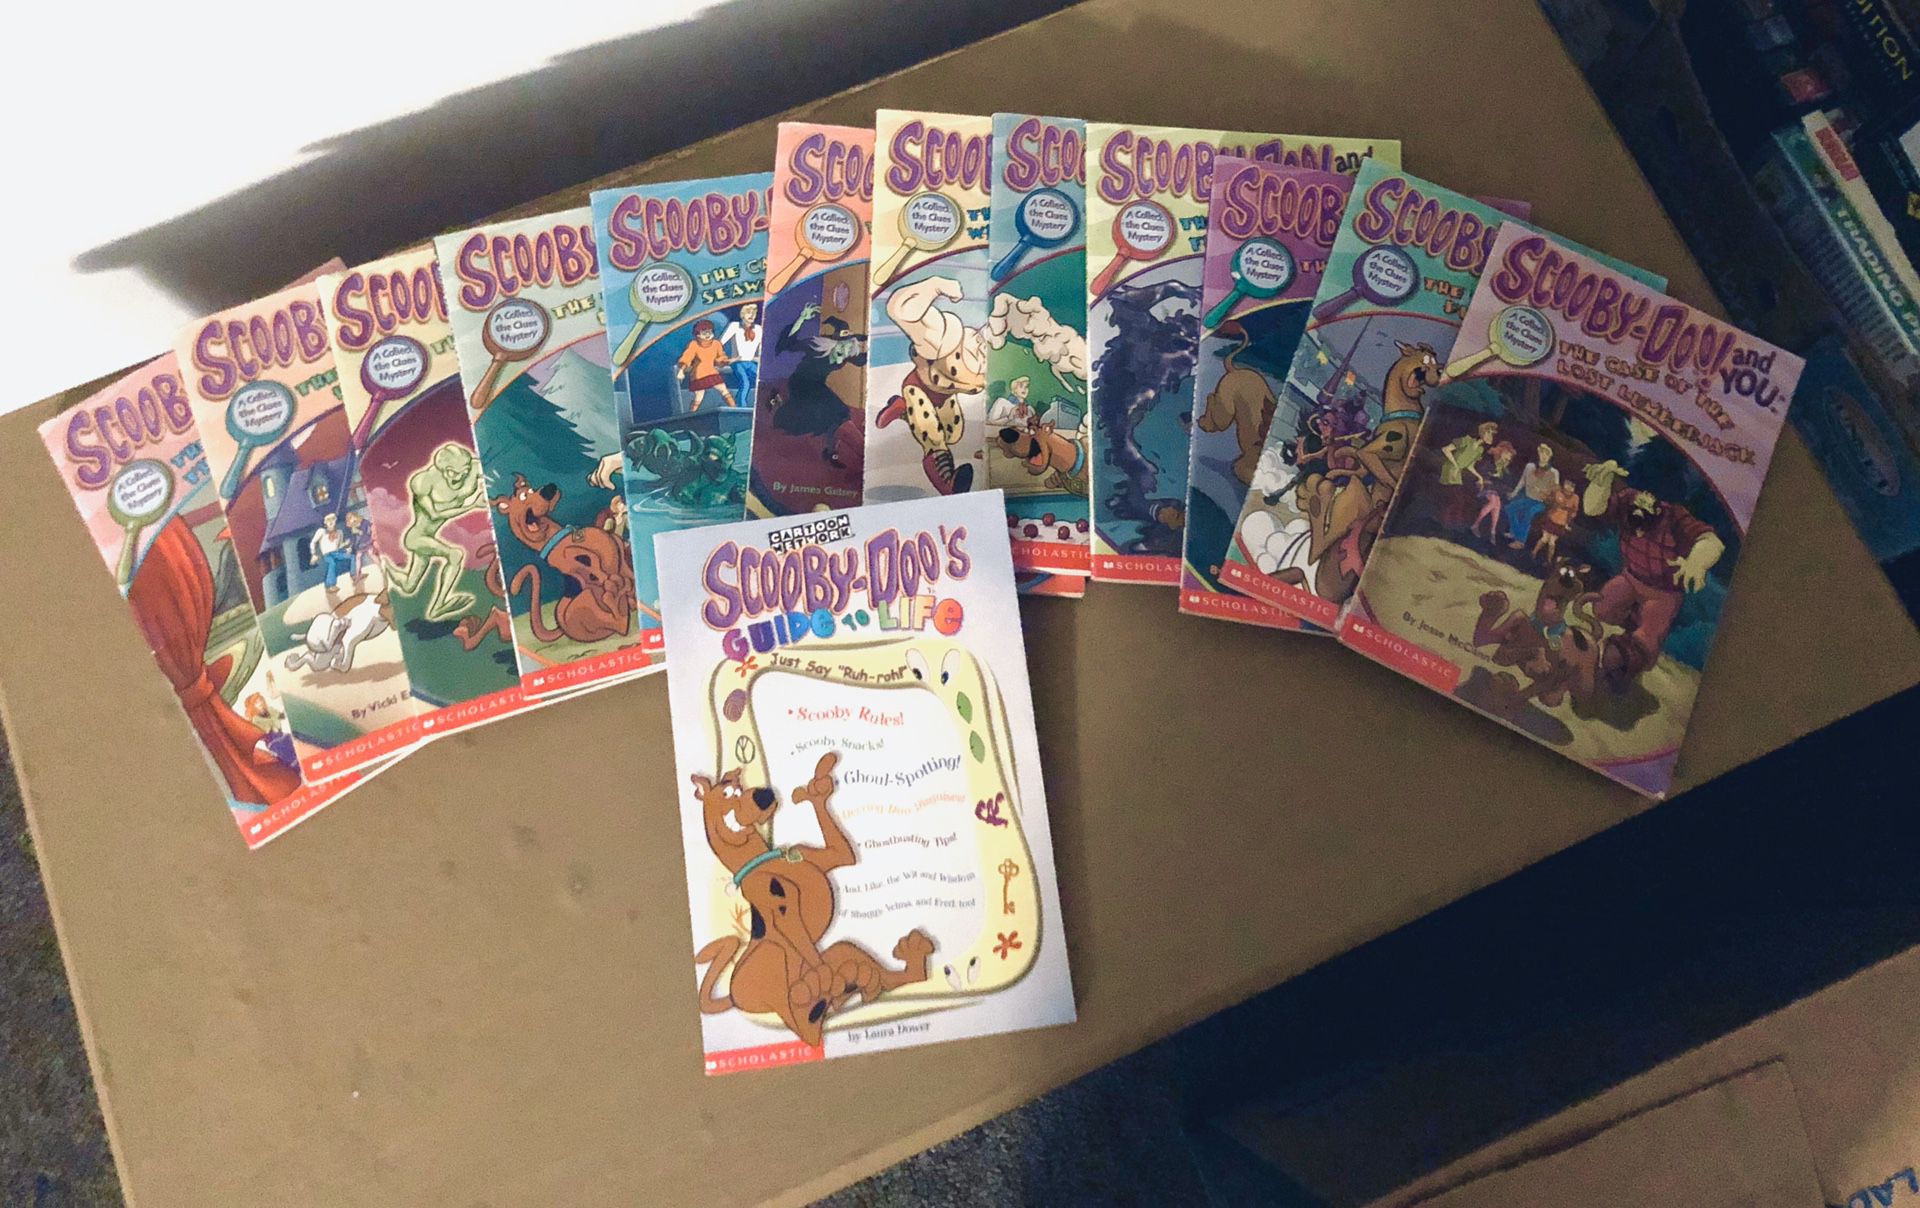 Scooby-Doo collect clues mystery book set